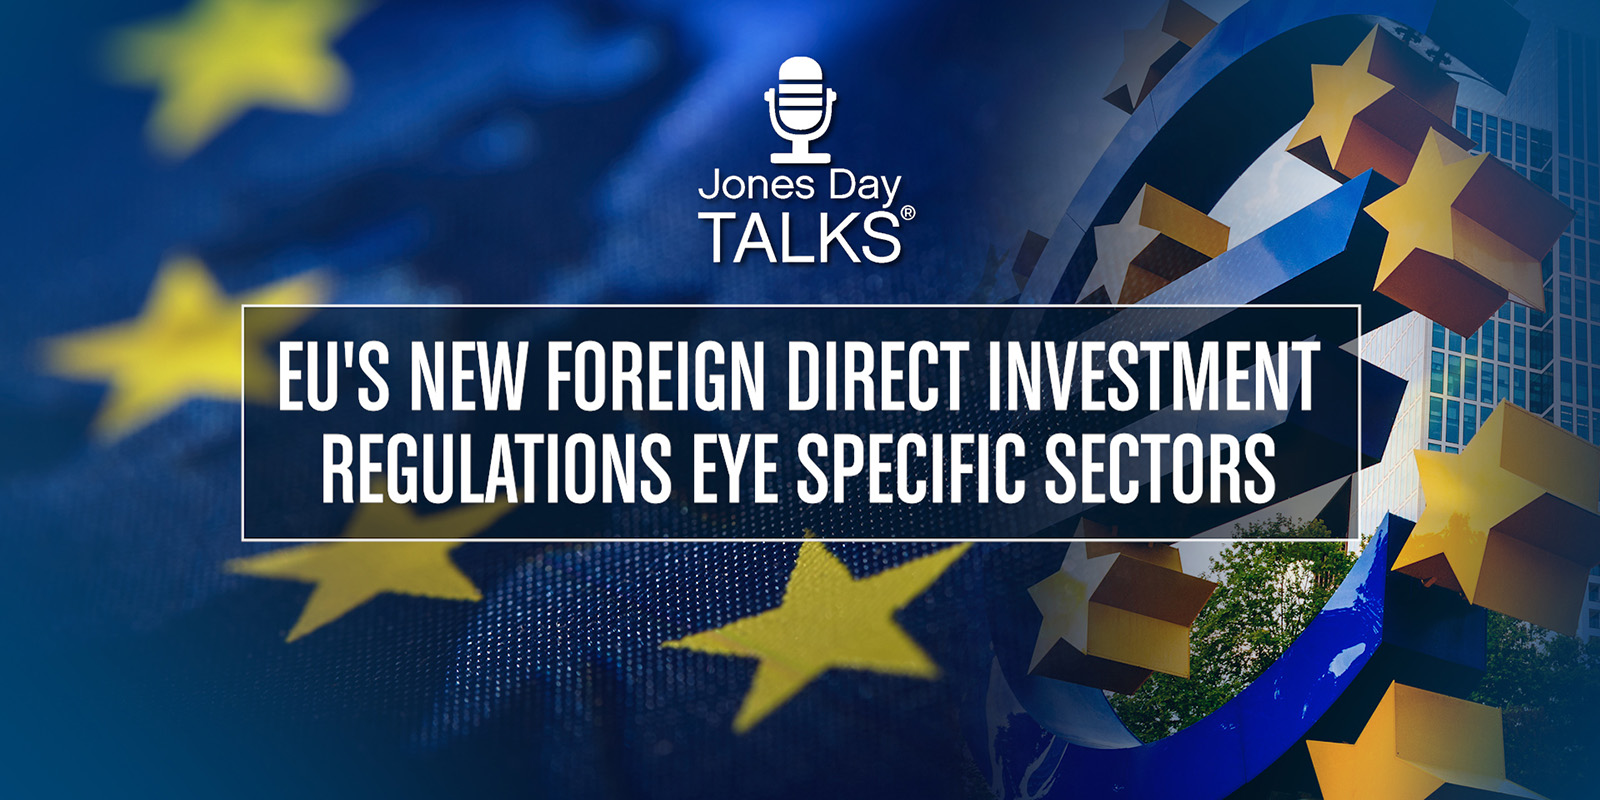 Jones Day Talks EU's New Foreign Direct Investment